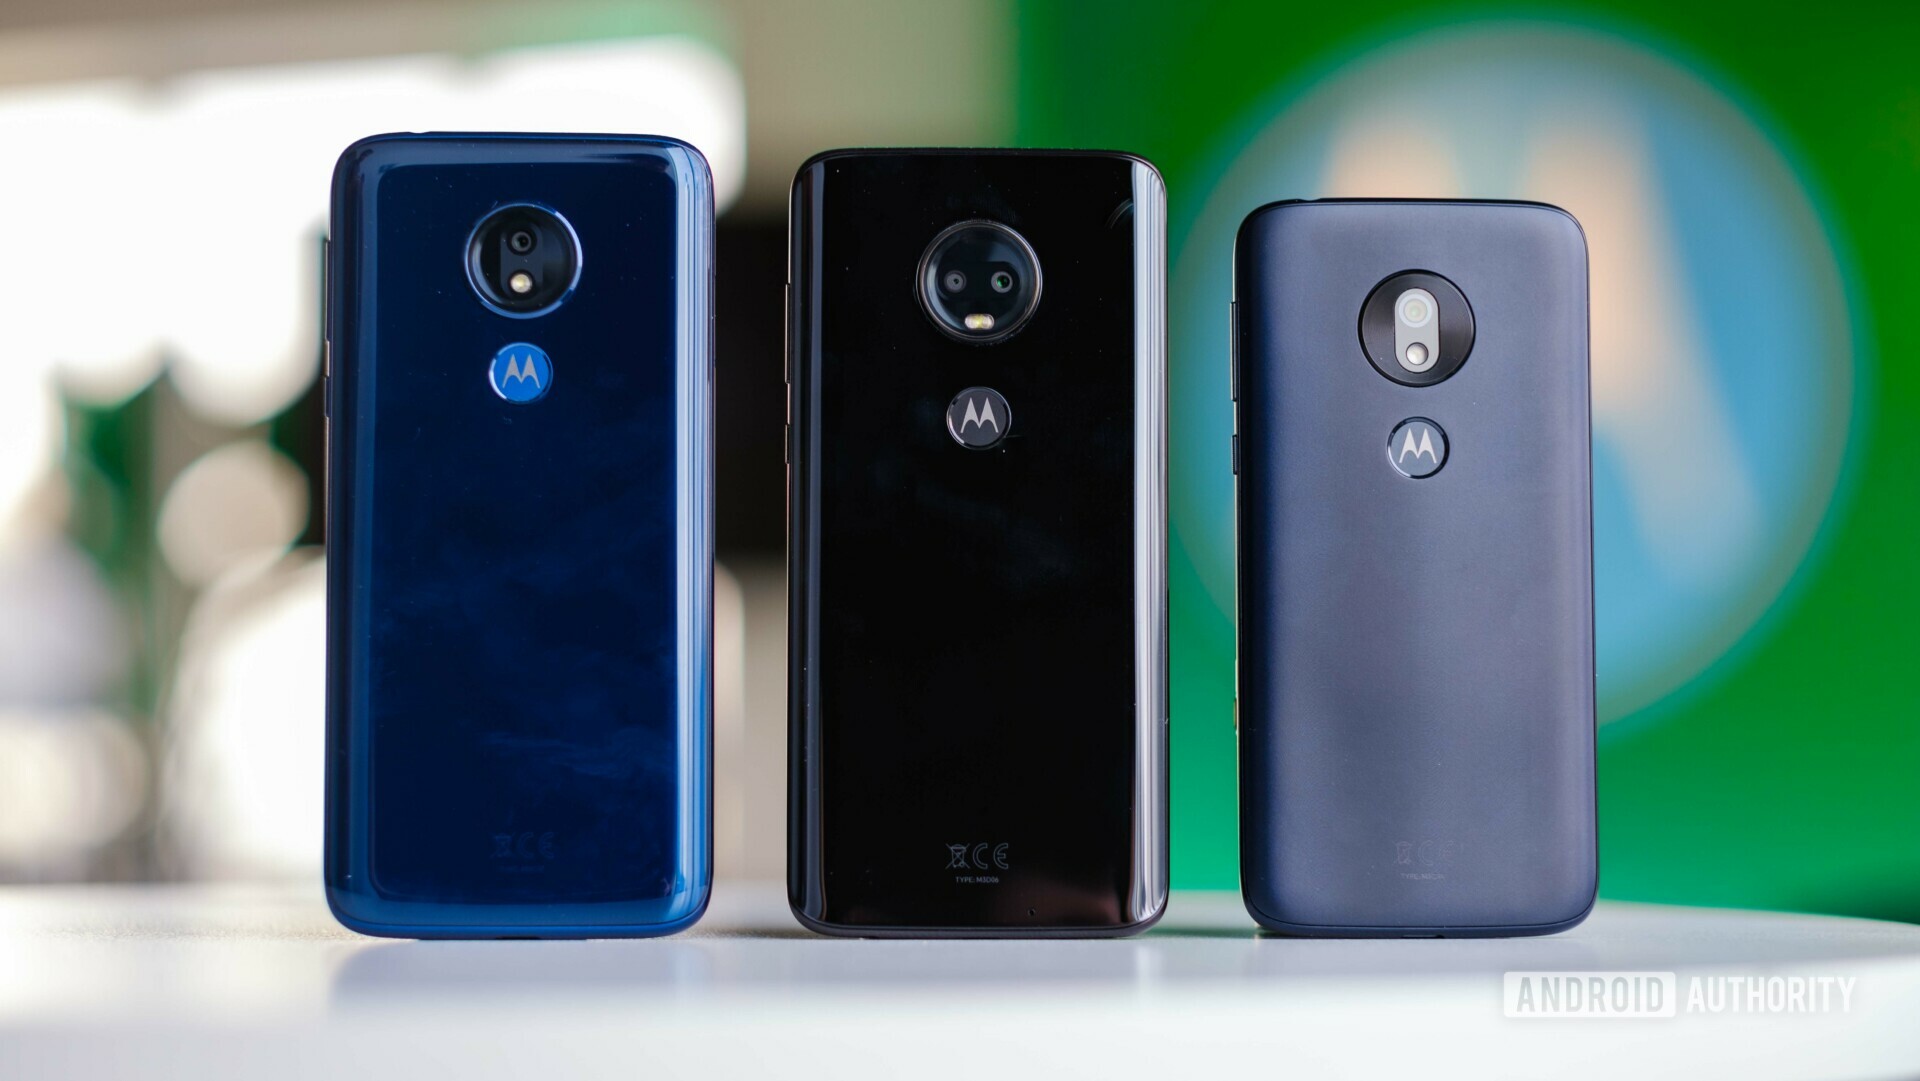 The backside of the Motorola Moto G7, Moto G7 Power and Moto G7 Play featuring daul cameras.